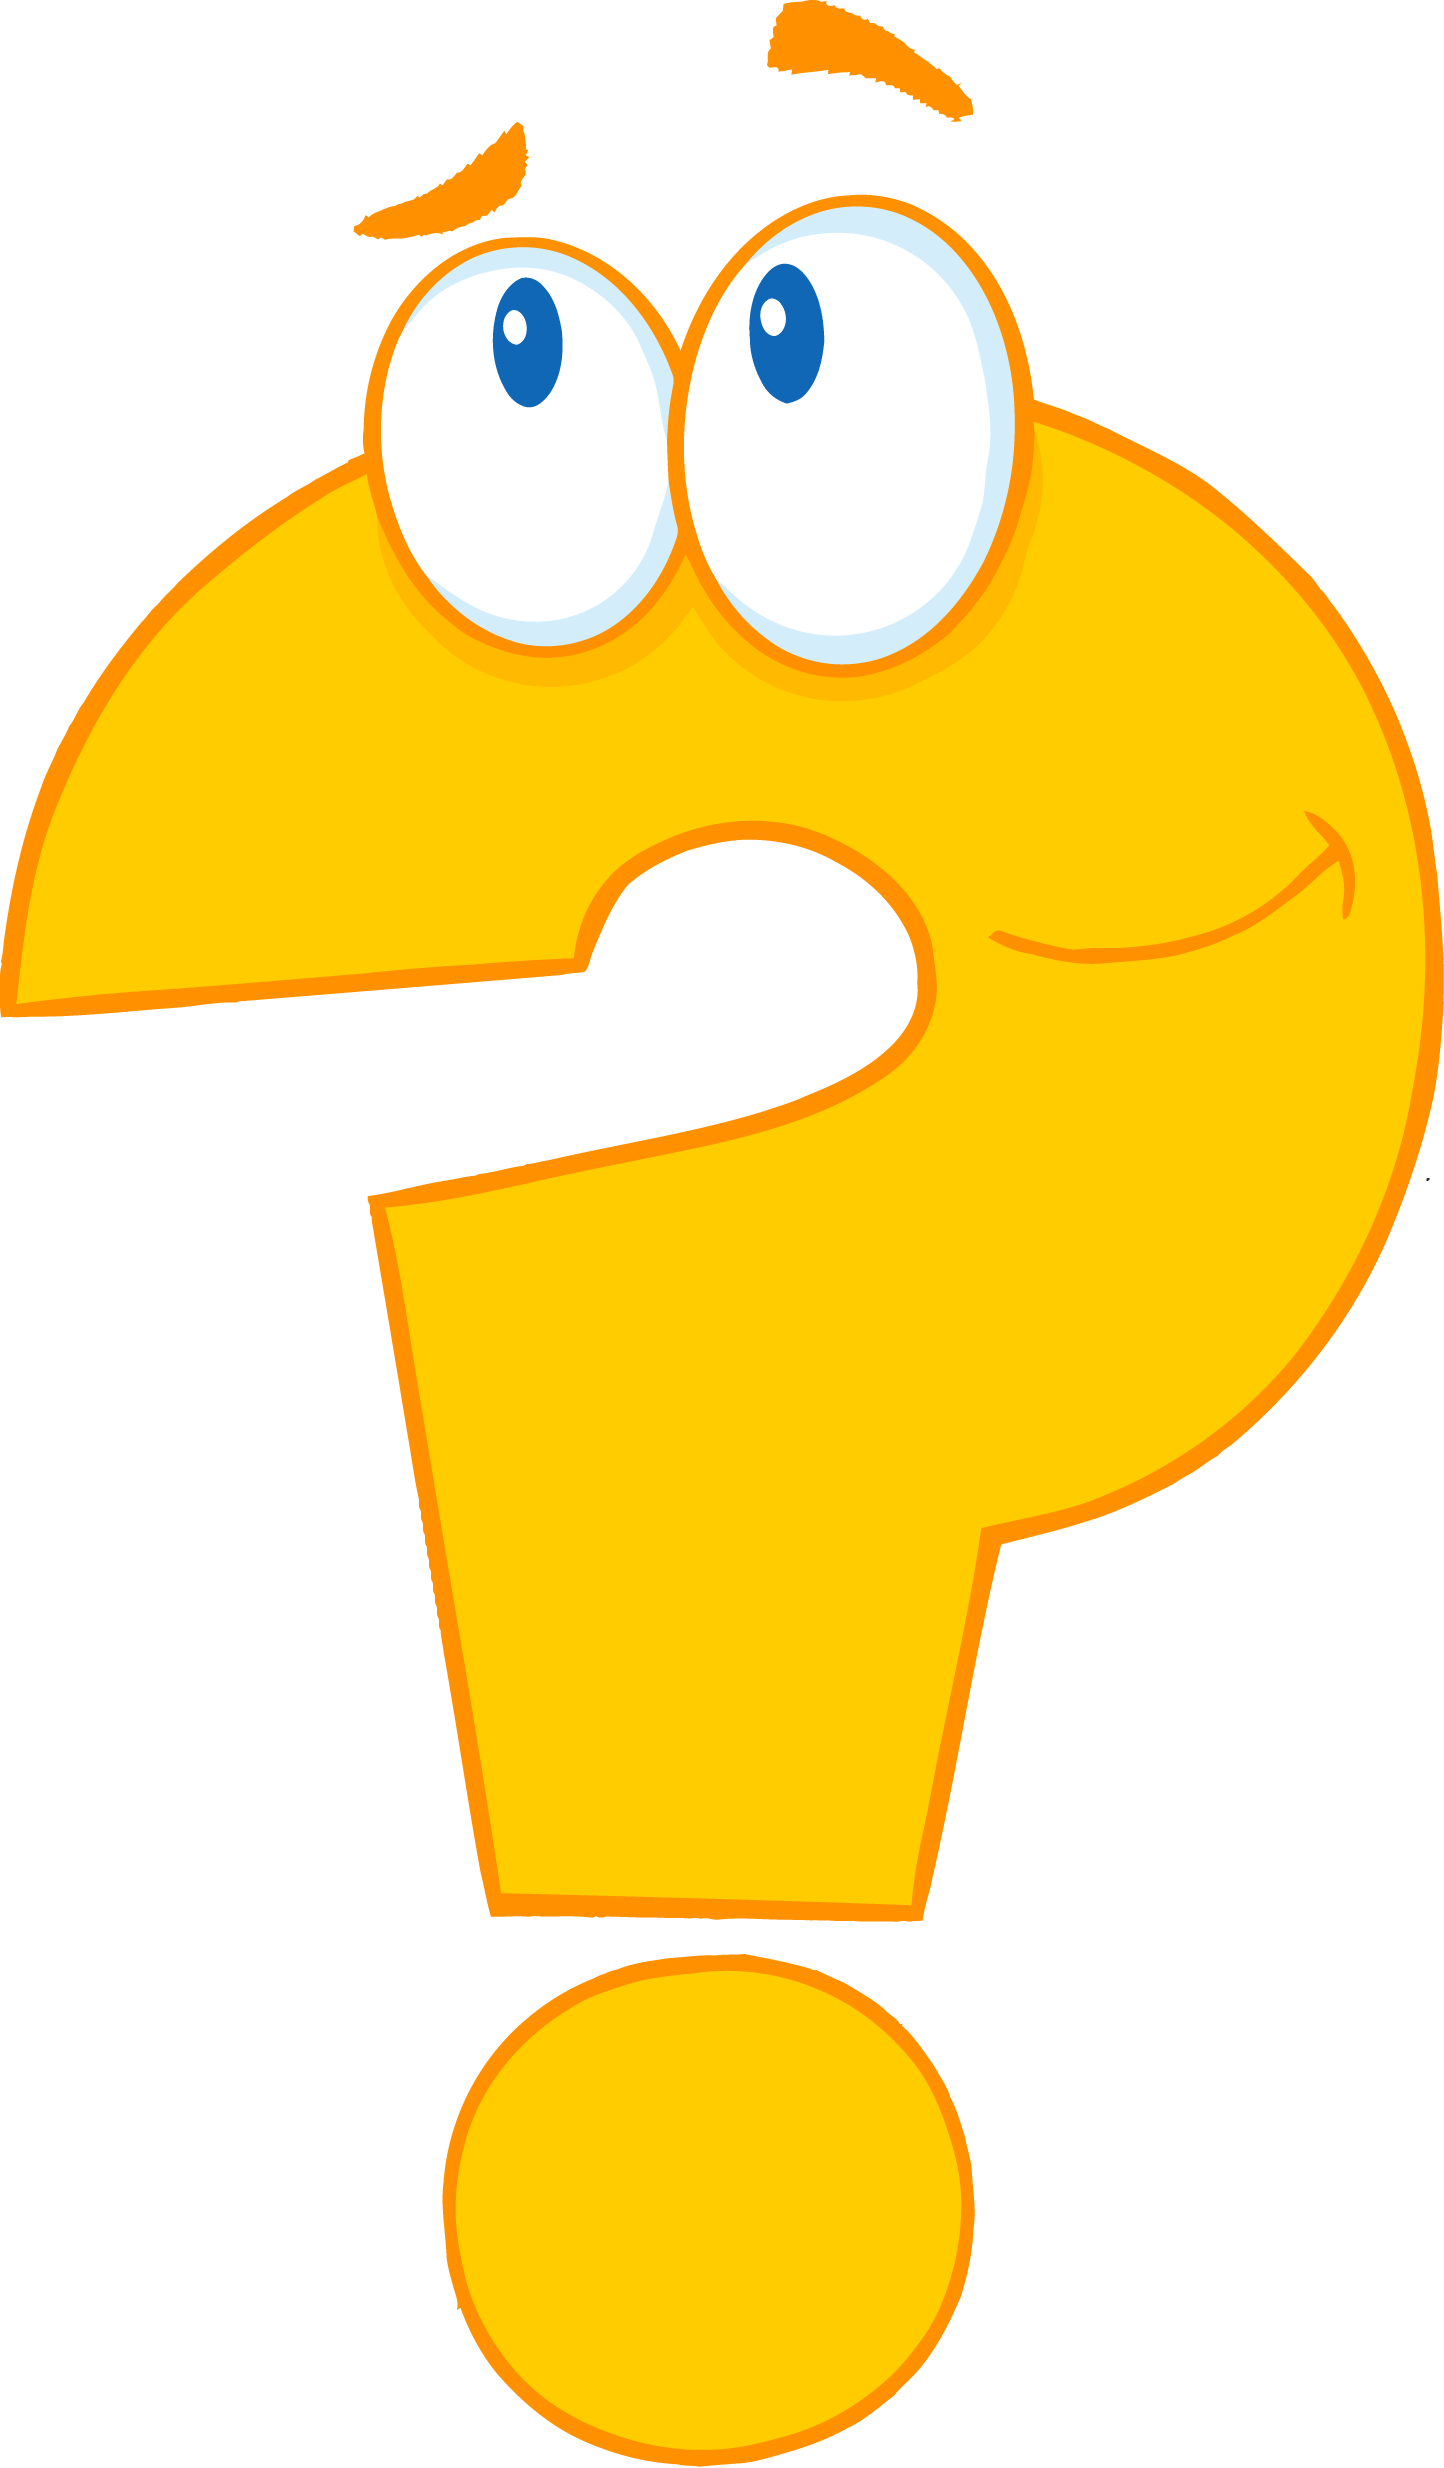 Question Mark Animation Clip Art - Question Mark Animation - Free ...